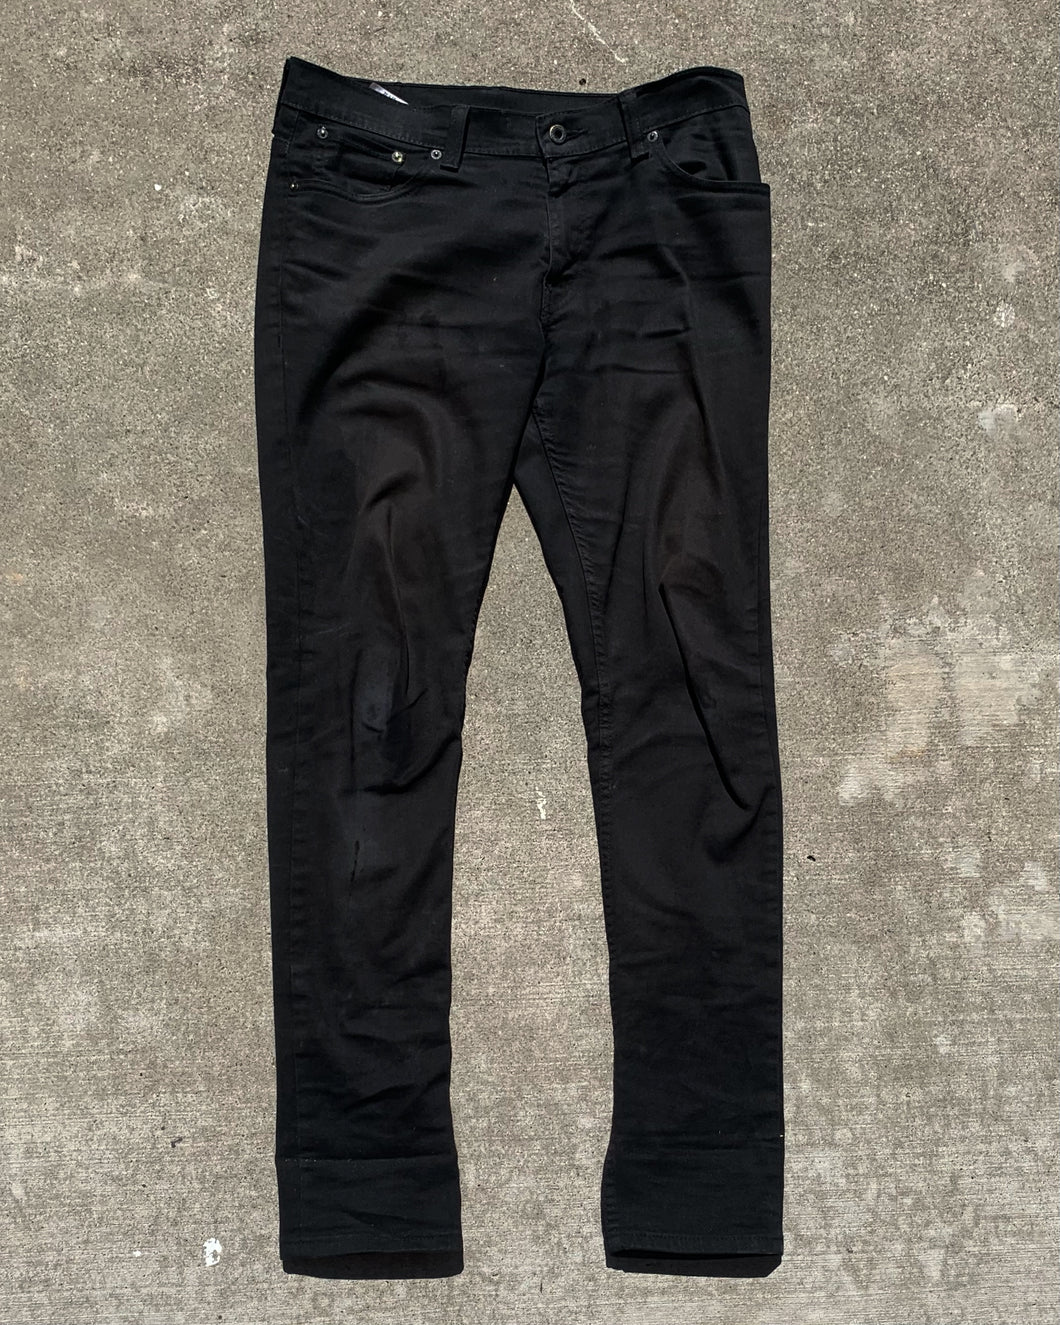 Levi's Black Faded Jeans